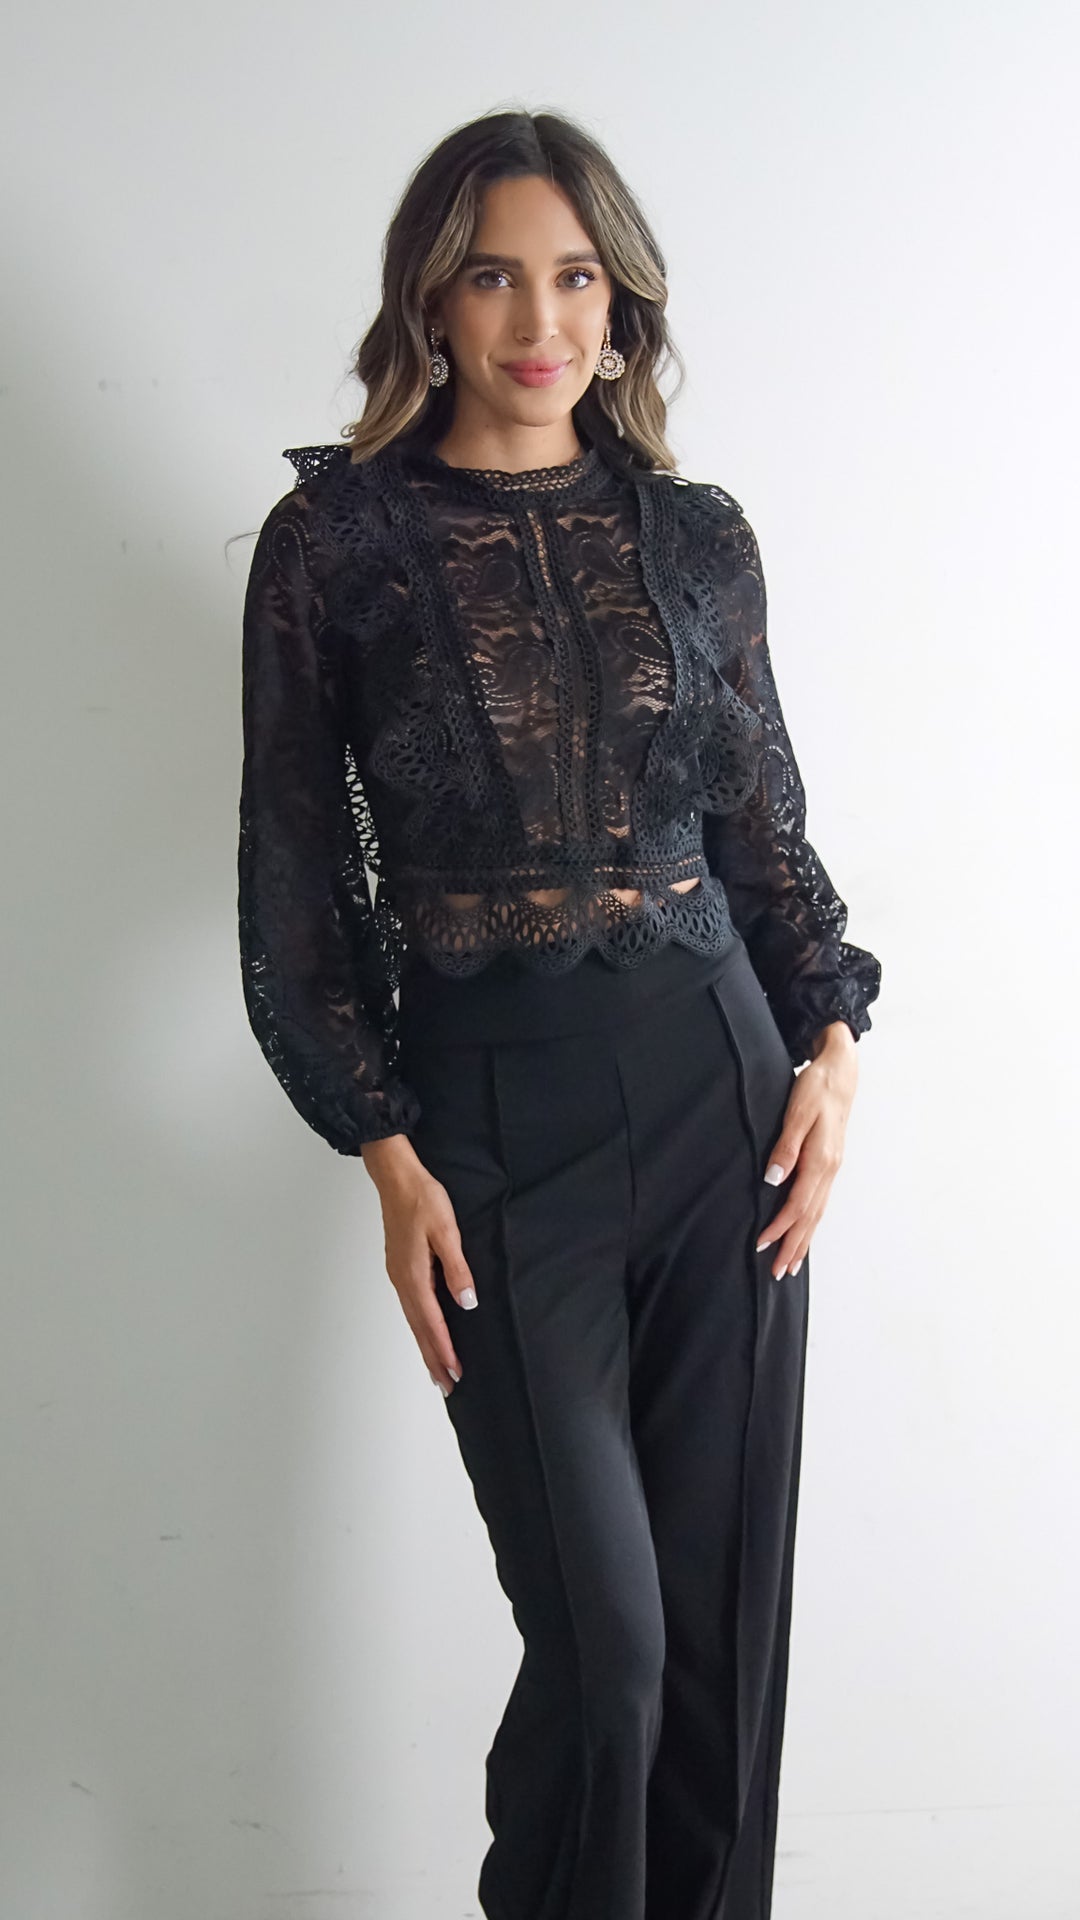 Frenzy Lace Top in Black - Steps New York